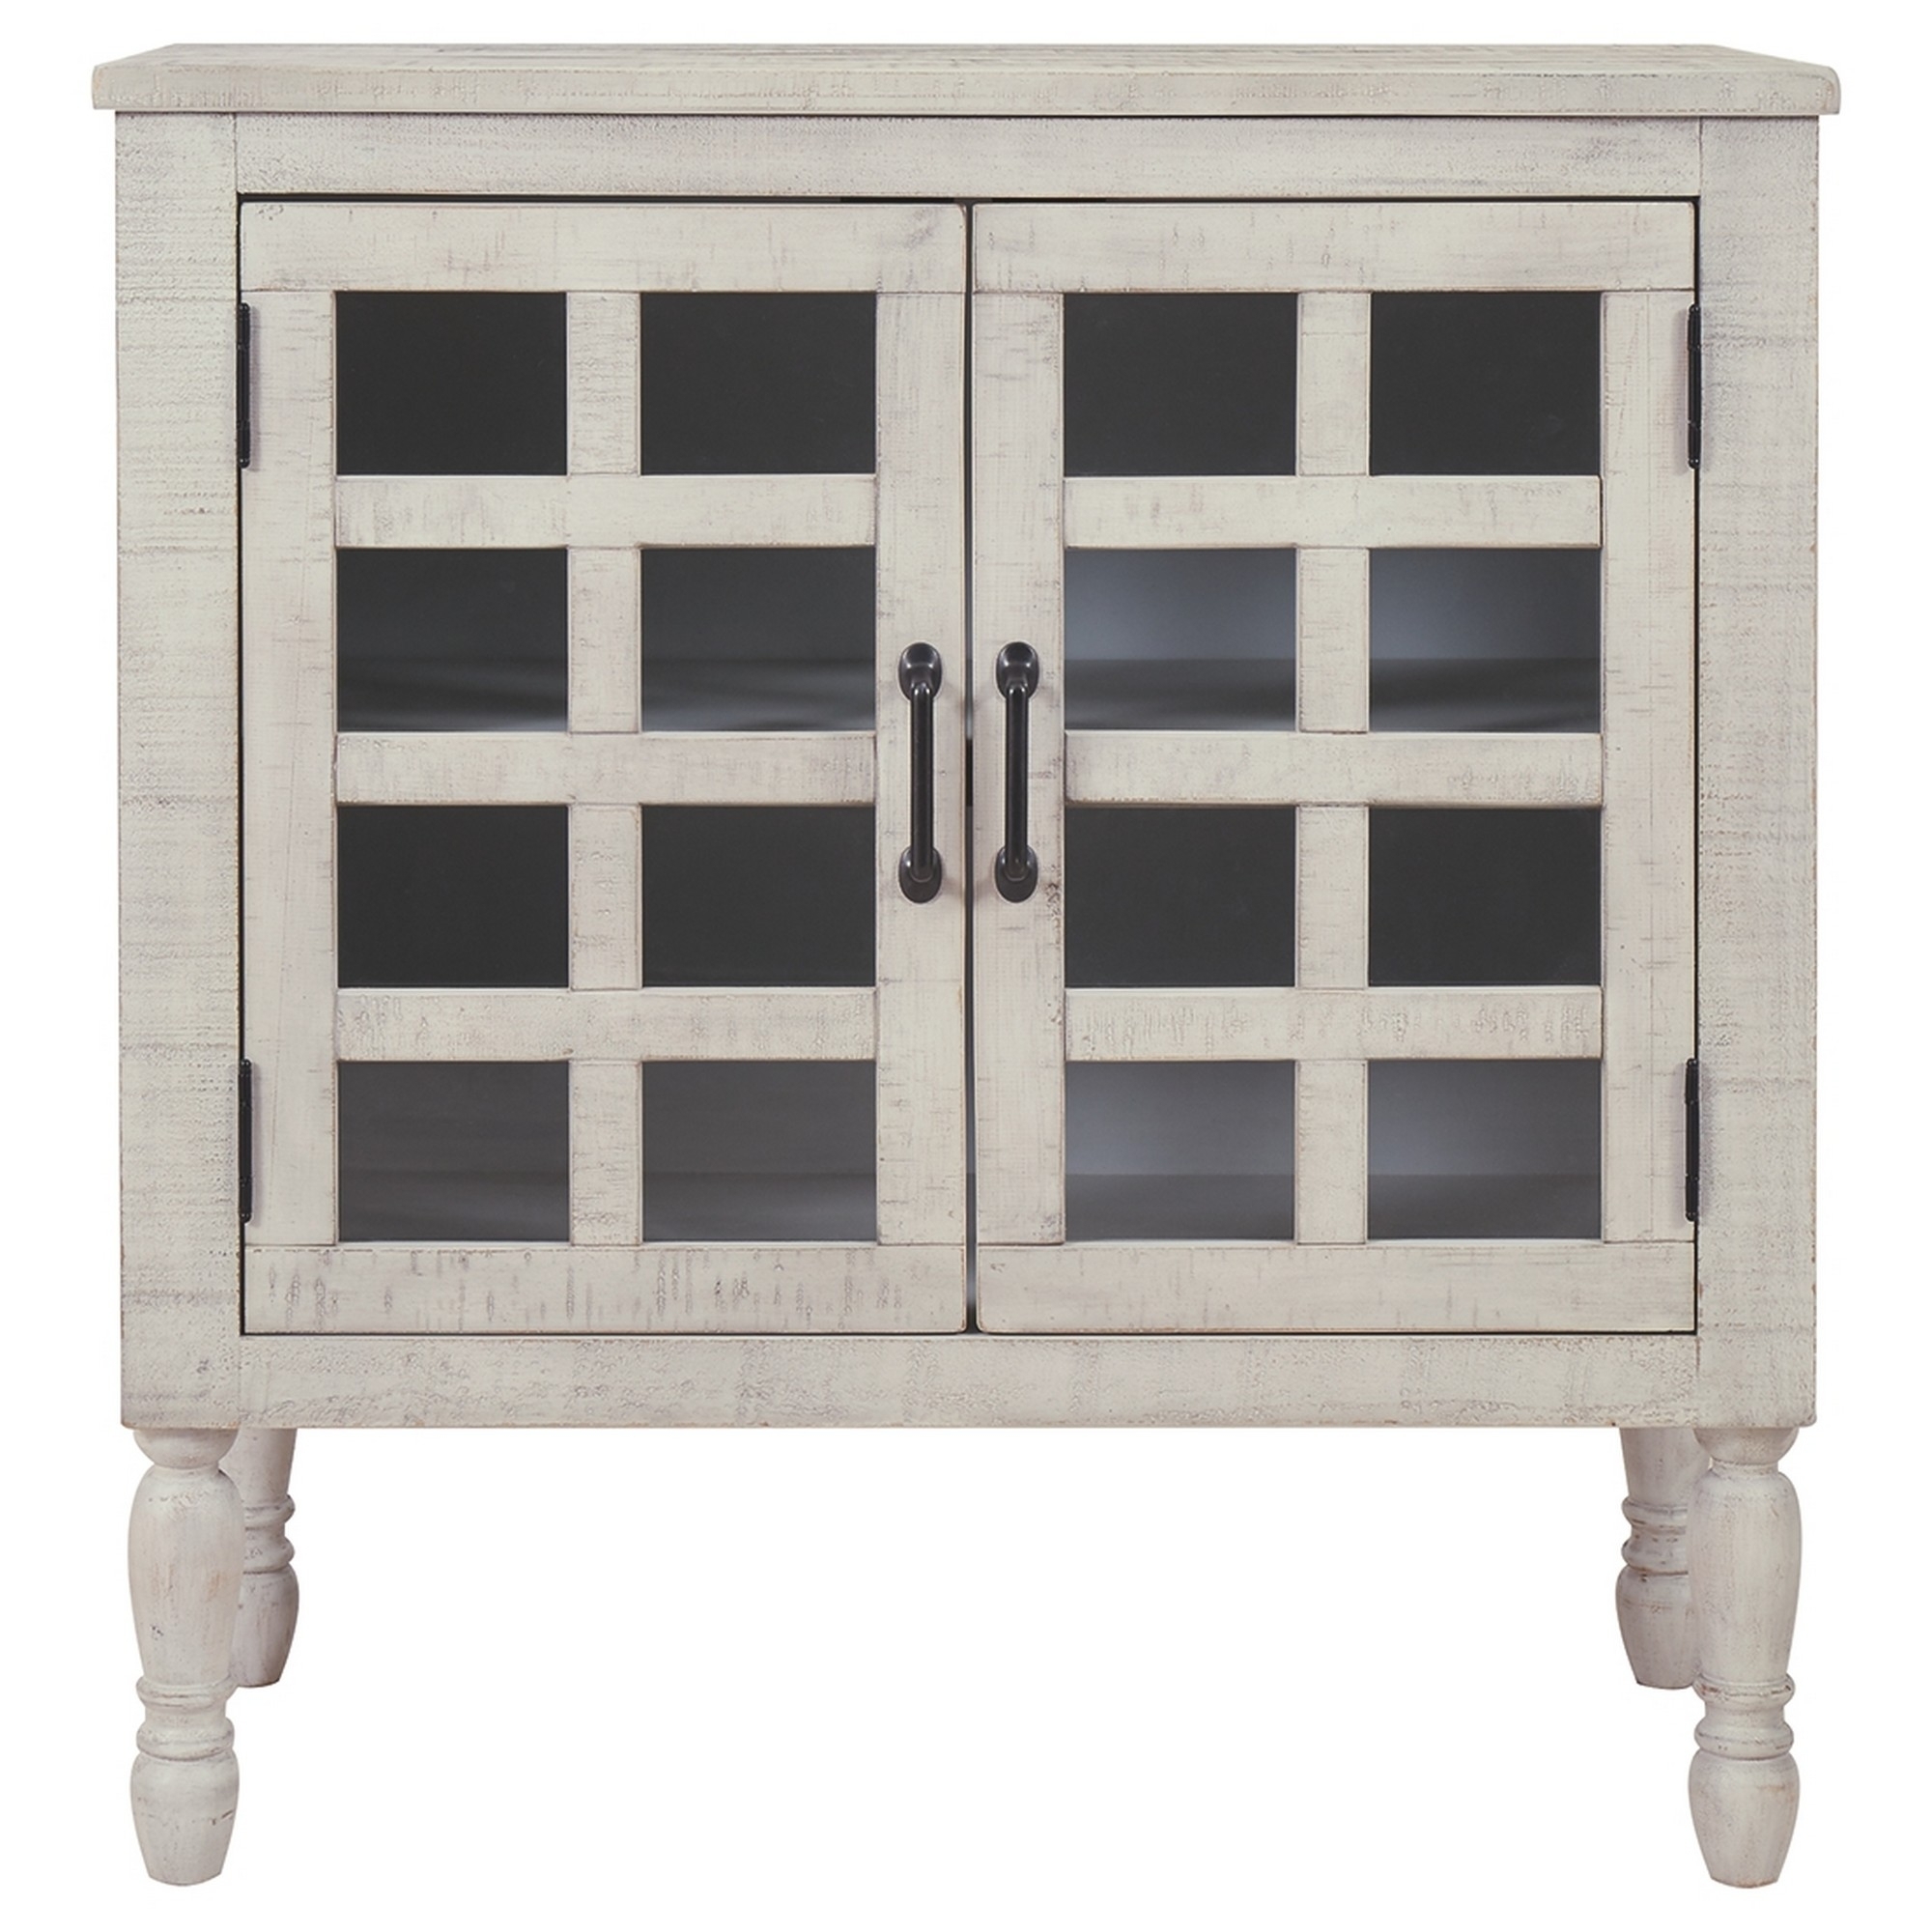 2 Glass Inlay Door Wooden Accent Cabinet with Turned Legs Antique White - Saltoro Sherpi - image 2 of 5